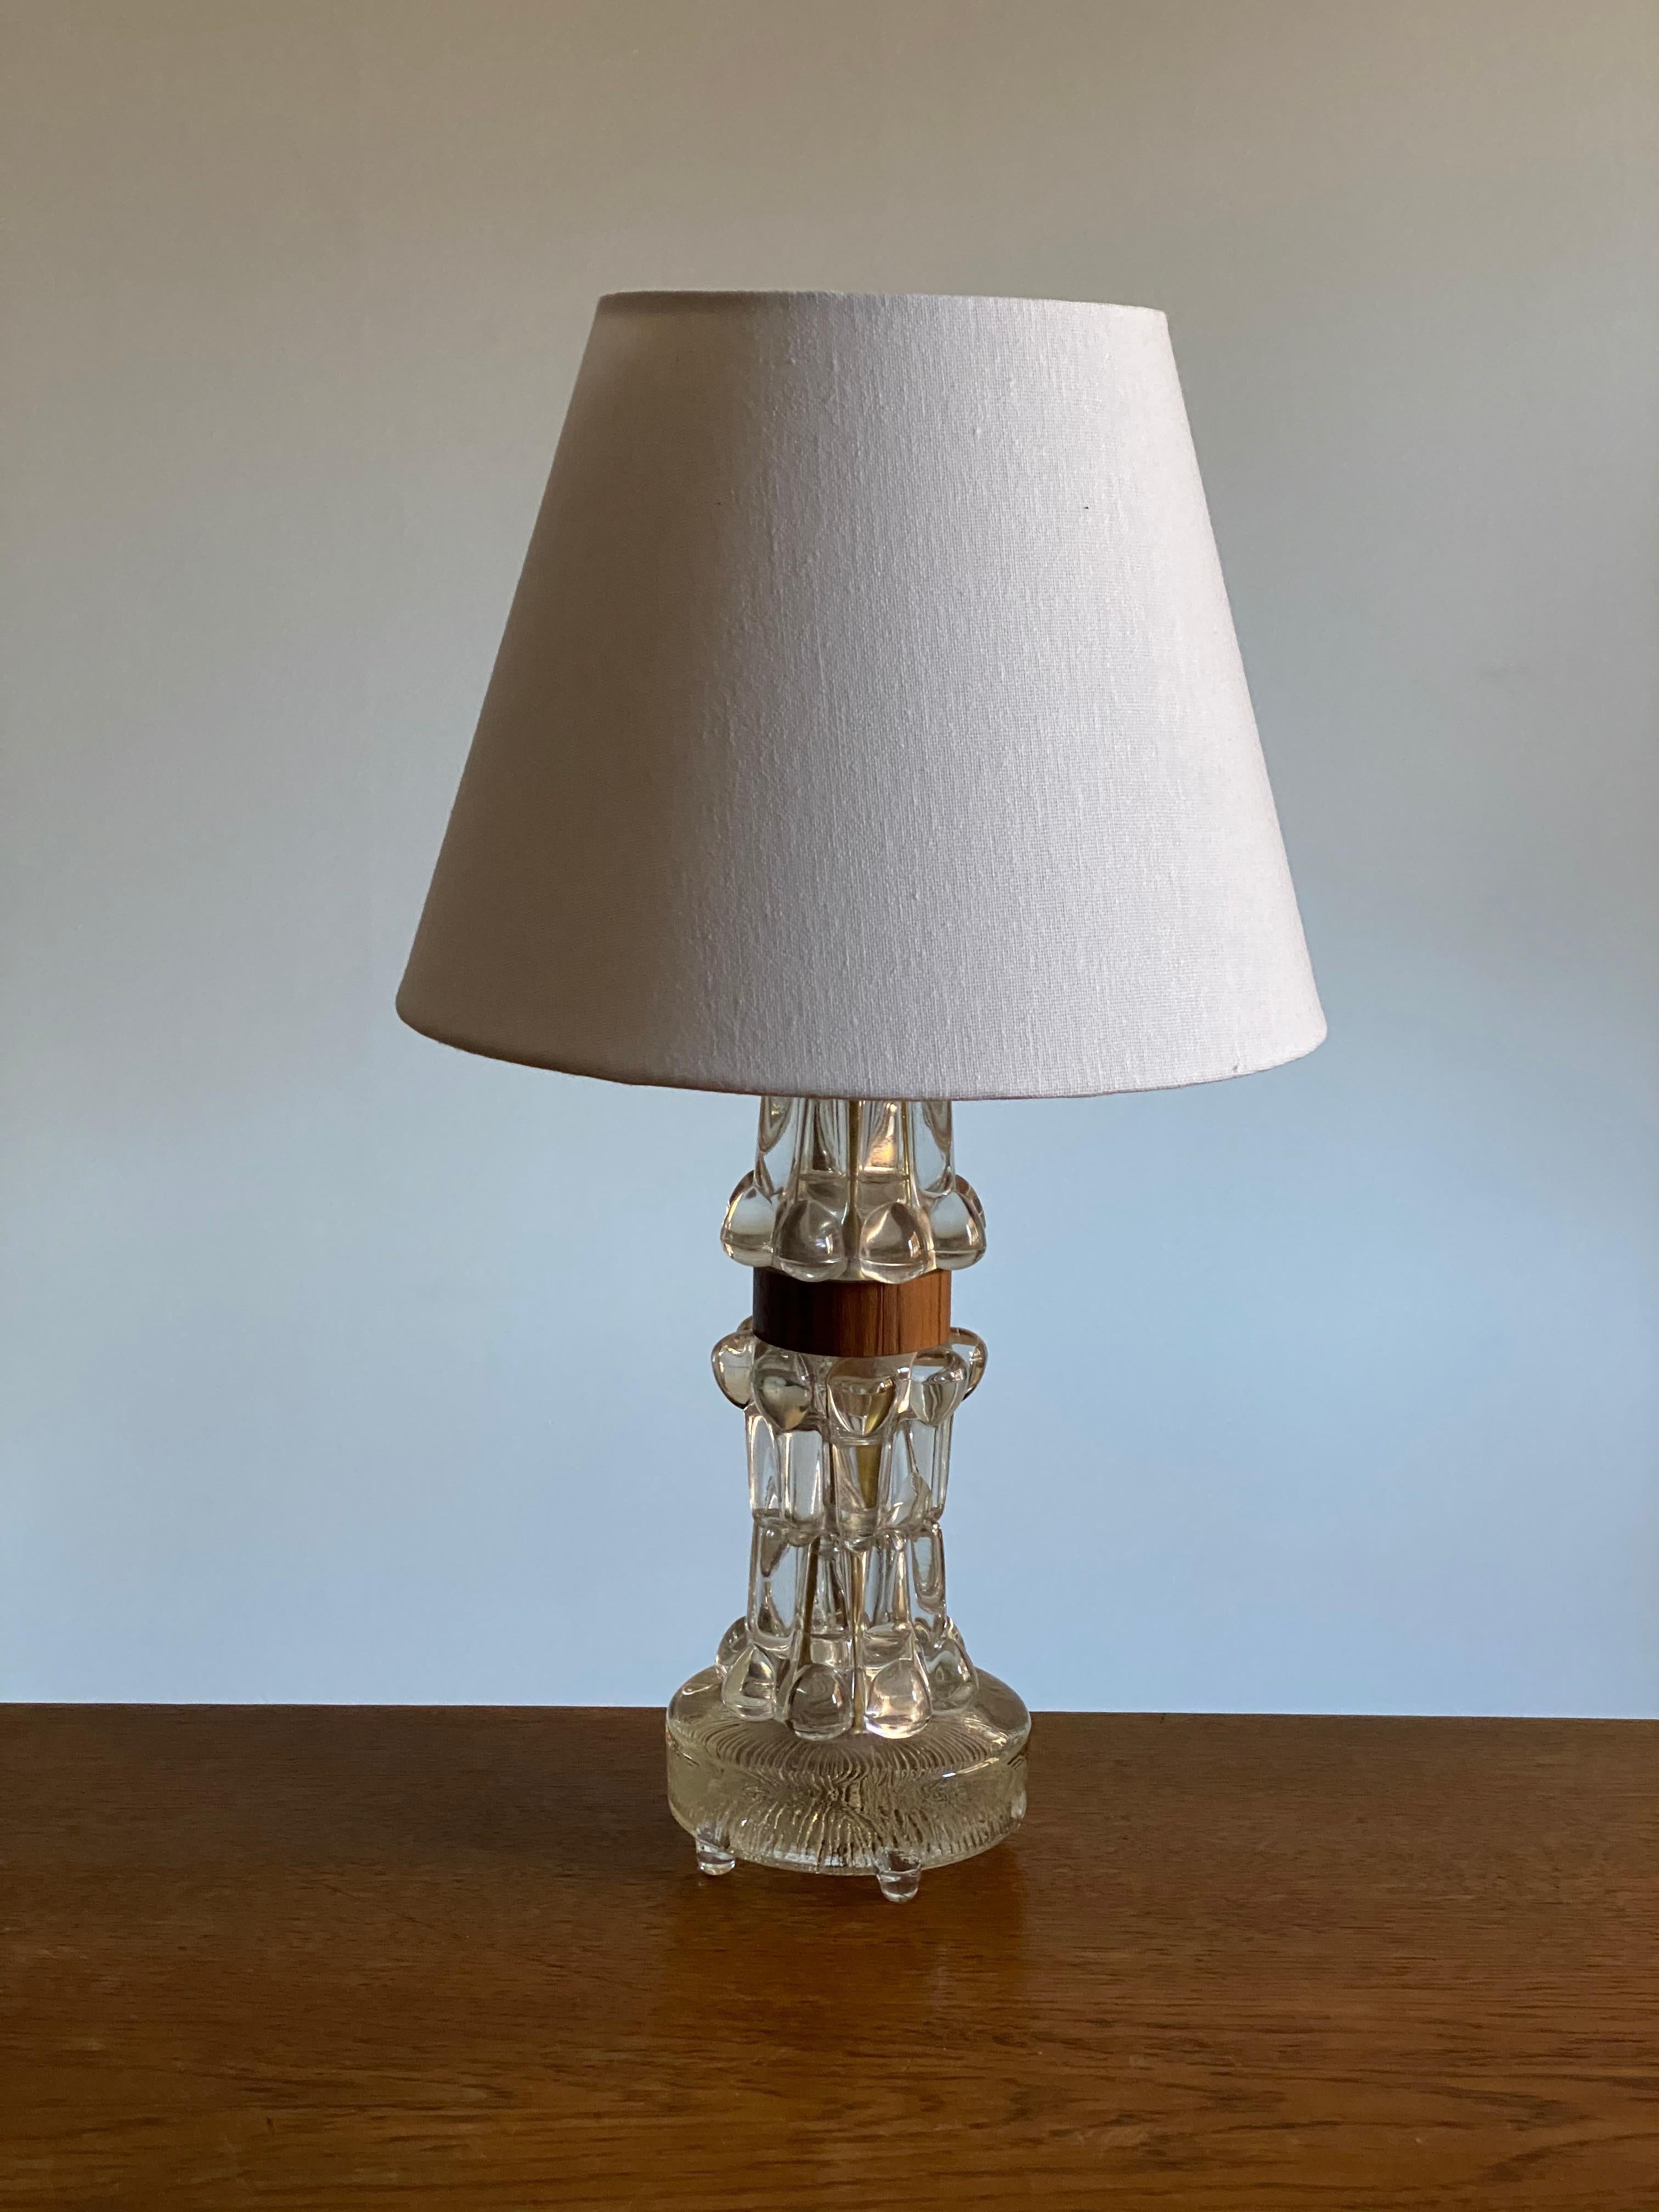 A highly modernist organic table lamp. Of Swedish production. In highly ornamented art glass, including a wooden ribbon in jacaranda or rosewood veneer.

Lampshade in the first two images is not included in the purchase. Stated measurements are